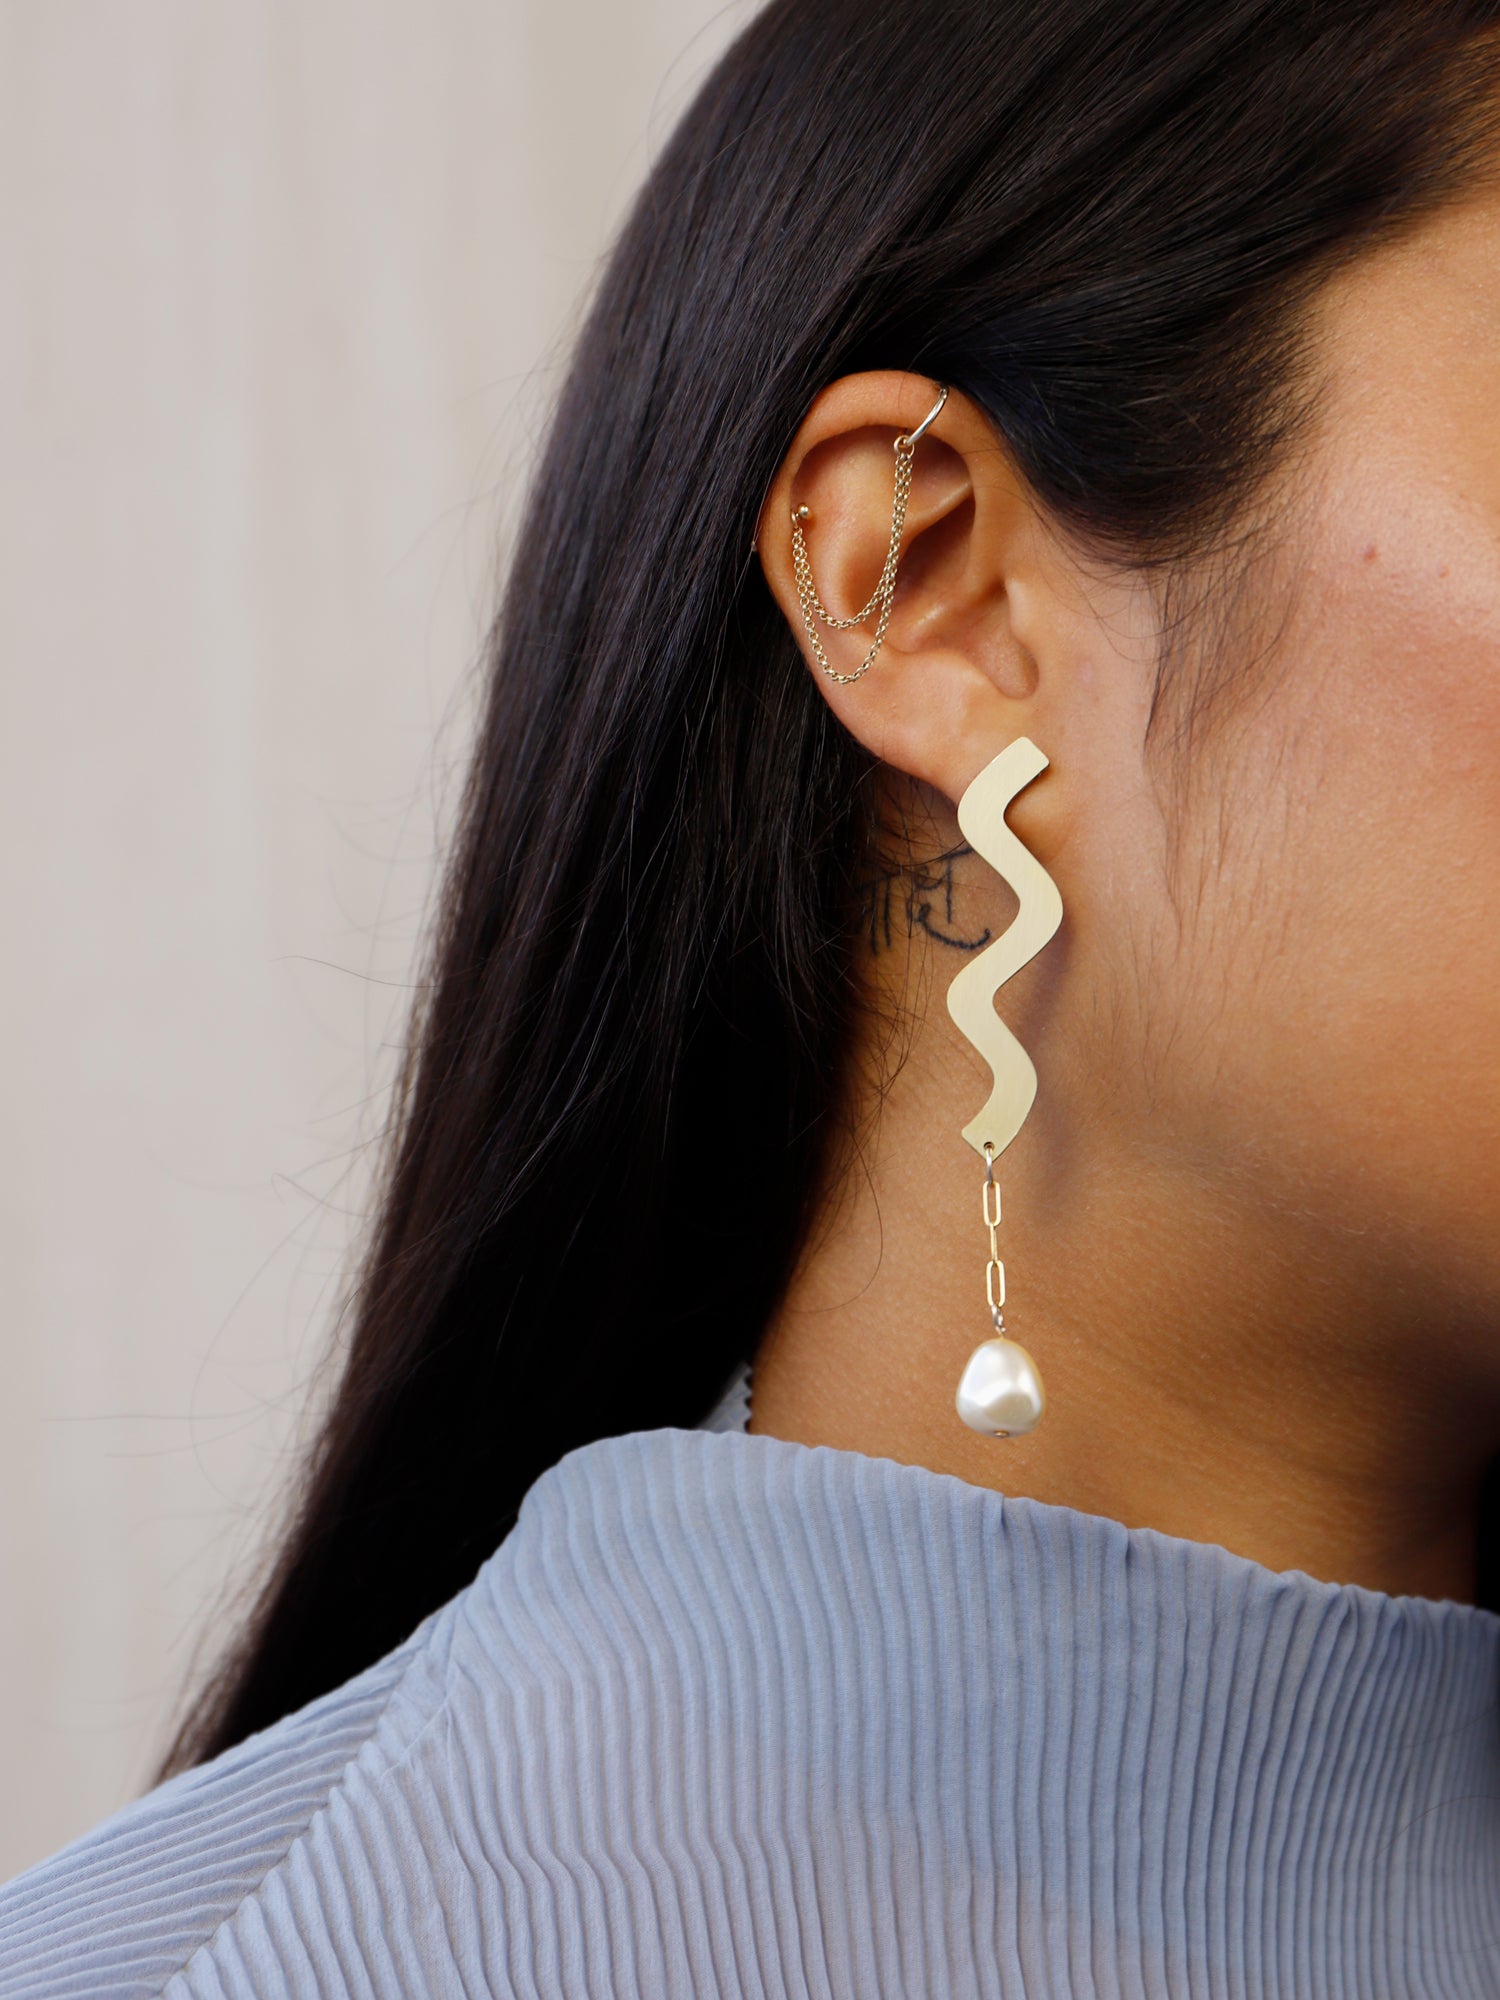 Martha Earrings in Brass. Wavy asymmetric statement earrings made in brass with our signature wood base, Czech glass baroque pearls, 14k gold-filled chain and sterling silver earring posts. Made in the UK by Wolf & Moon.